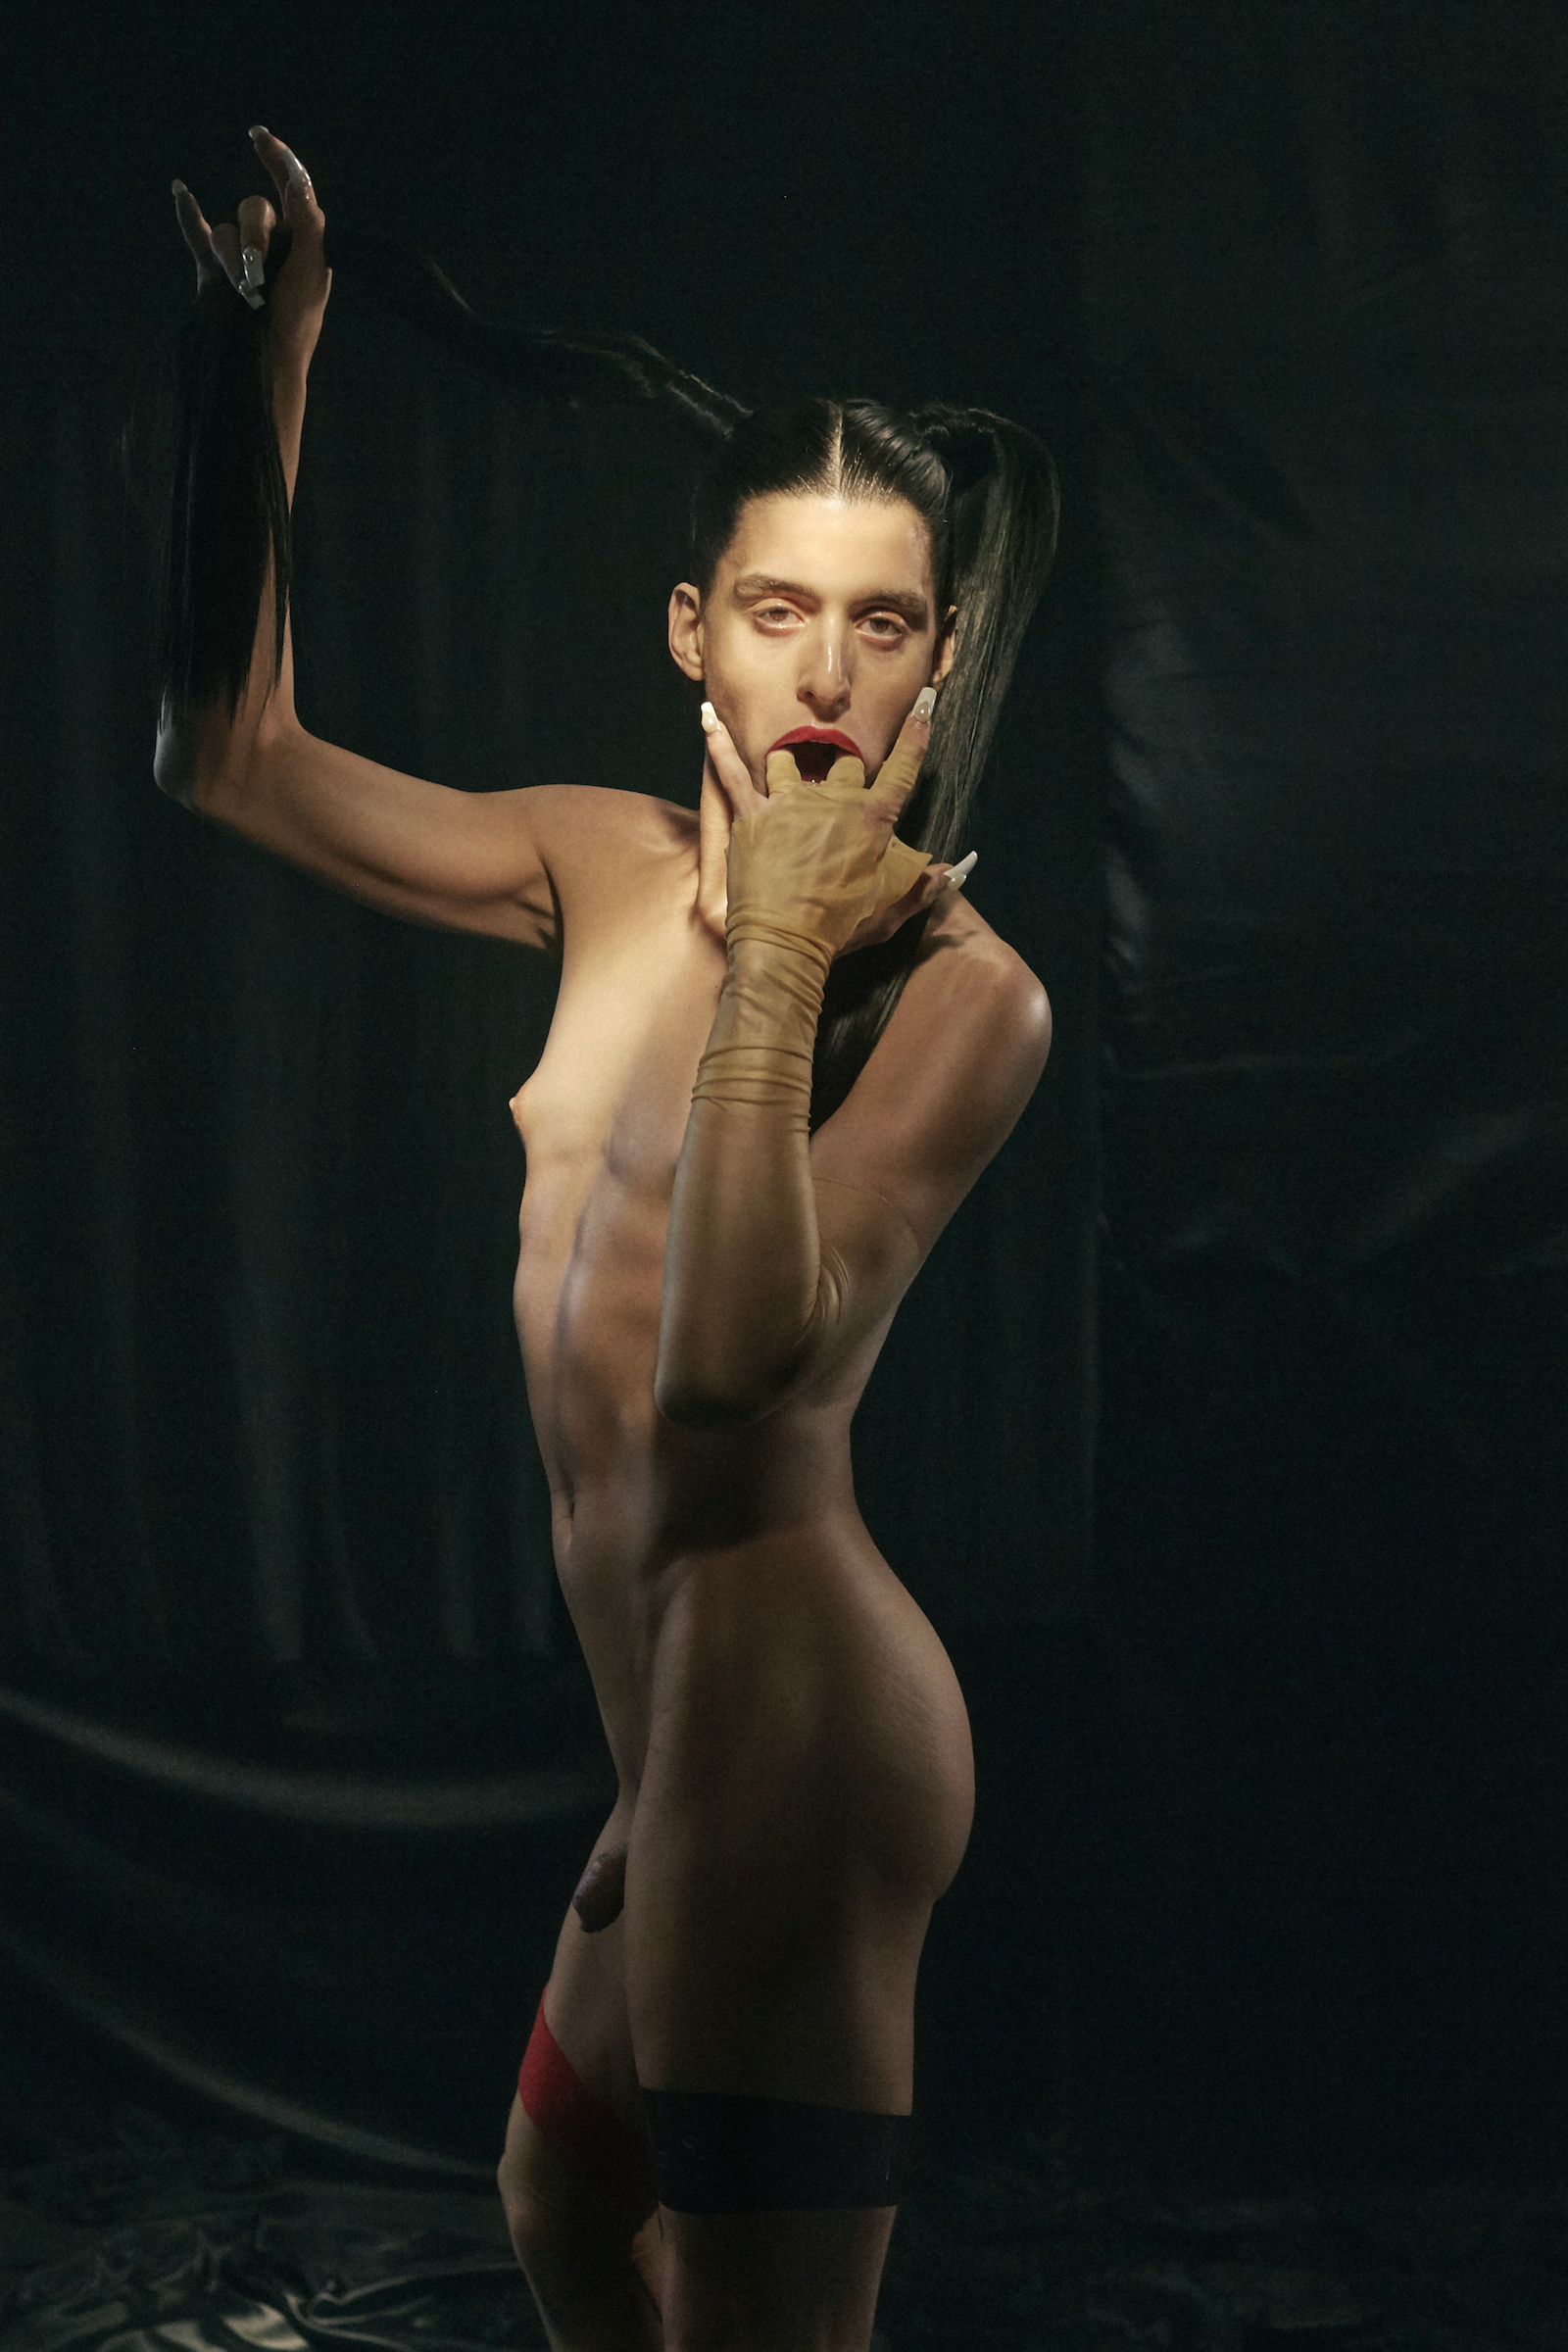 In conversation with Arca.